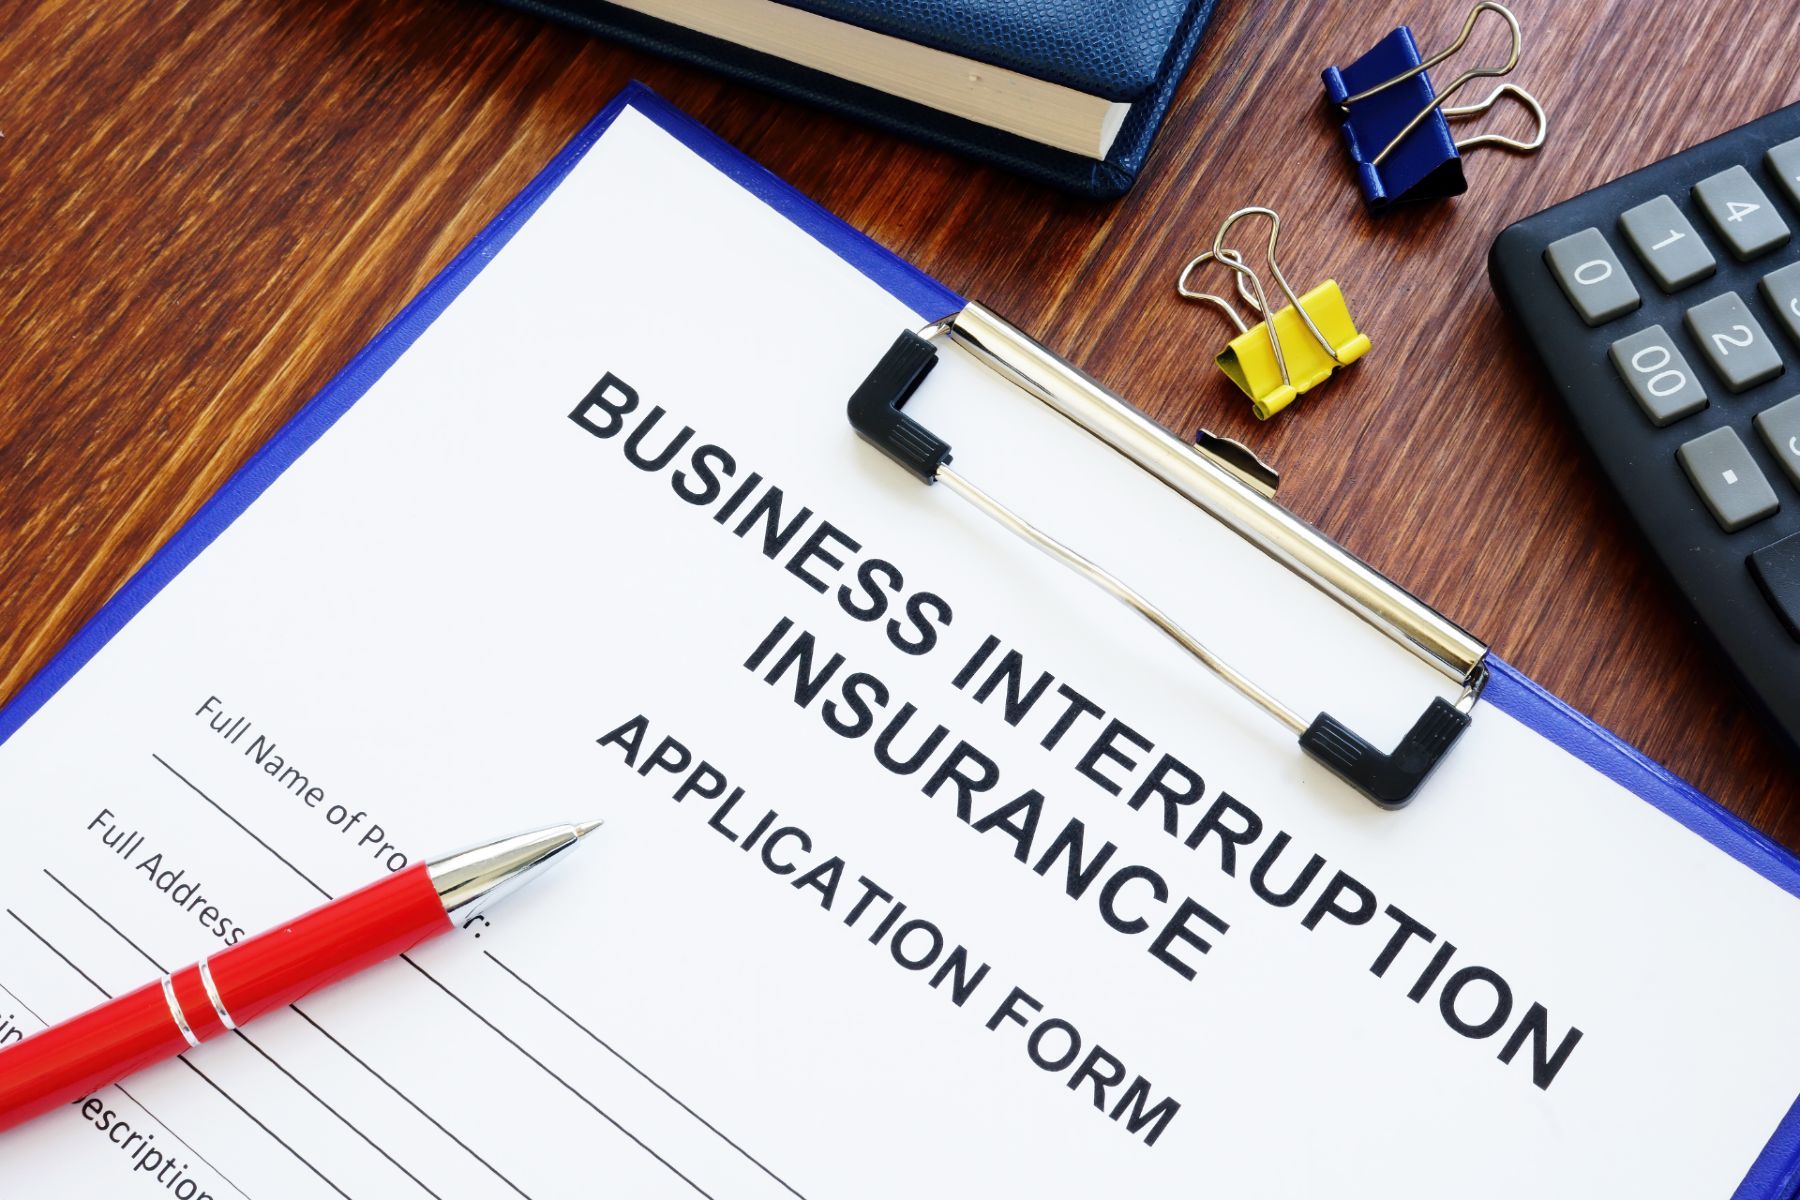 A clipboard holding a business interruption insurance application form, surrounded by clips, a pen and a calculator - business interruption test case